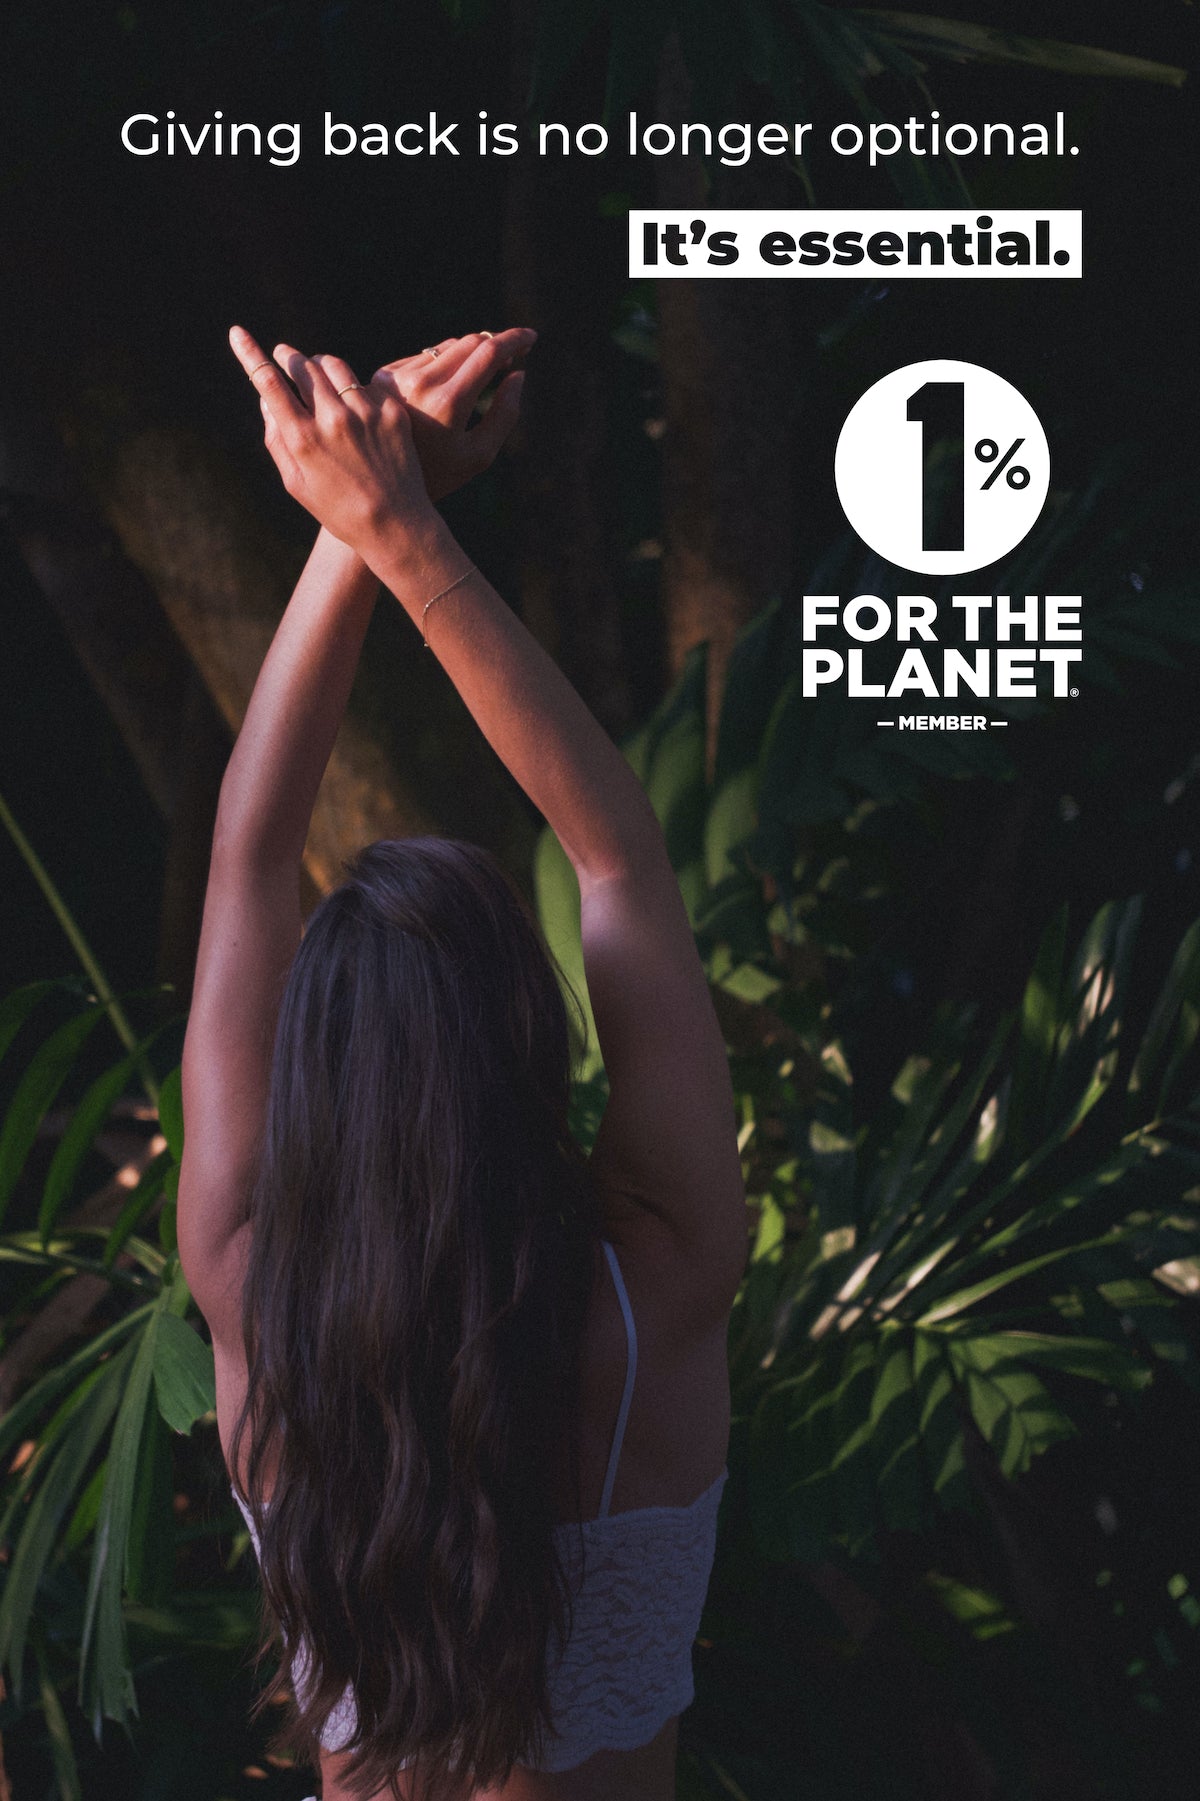 Model with arms stretched upward toward text stating "Giving back is no longer optional. It's essential." 1% for the Planet member logo. Tropical foliage in background.